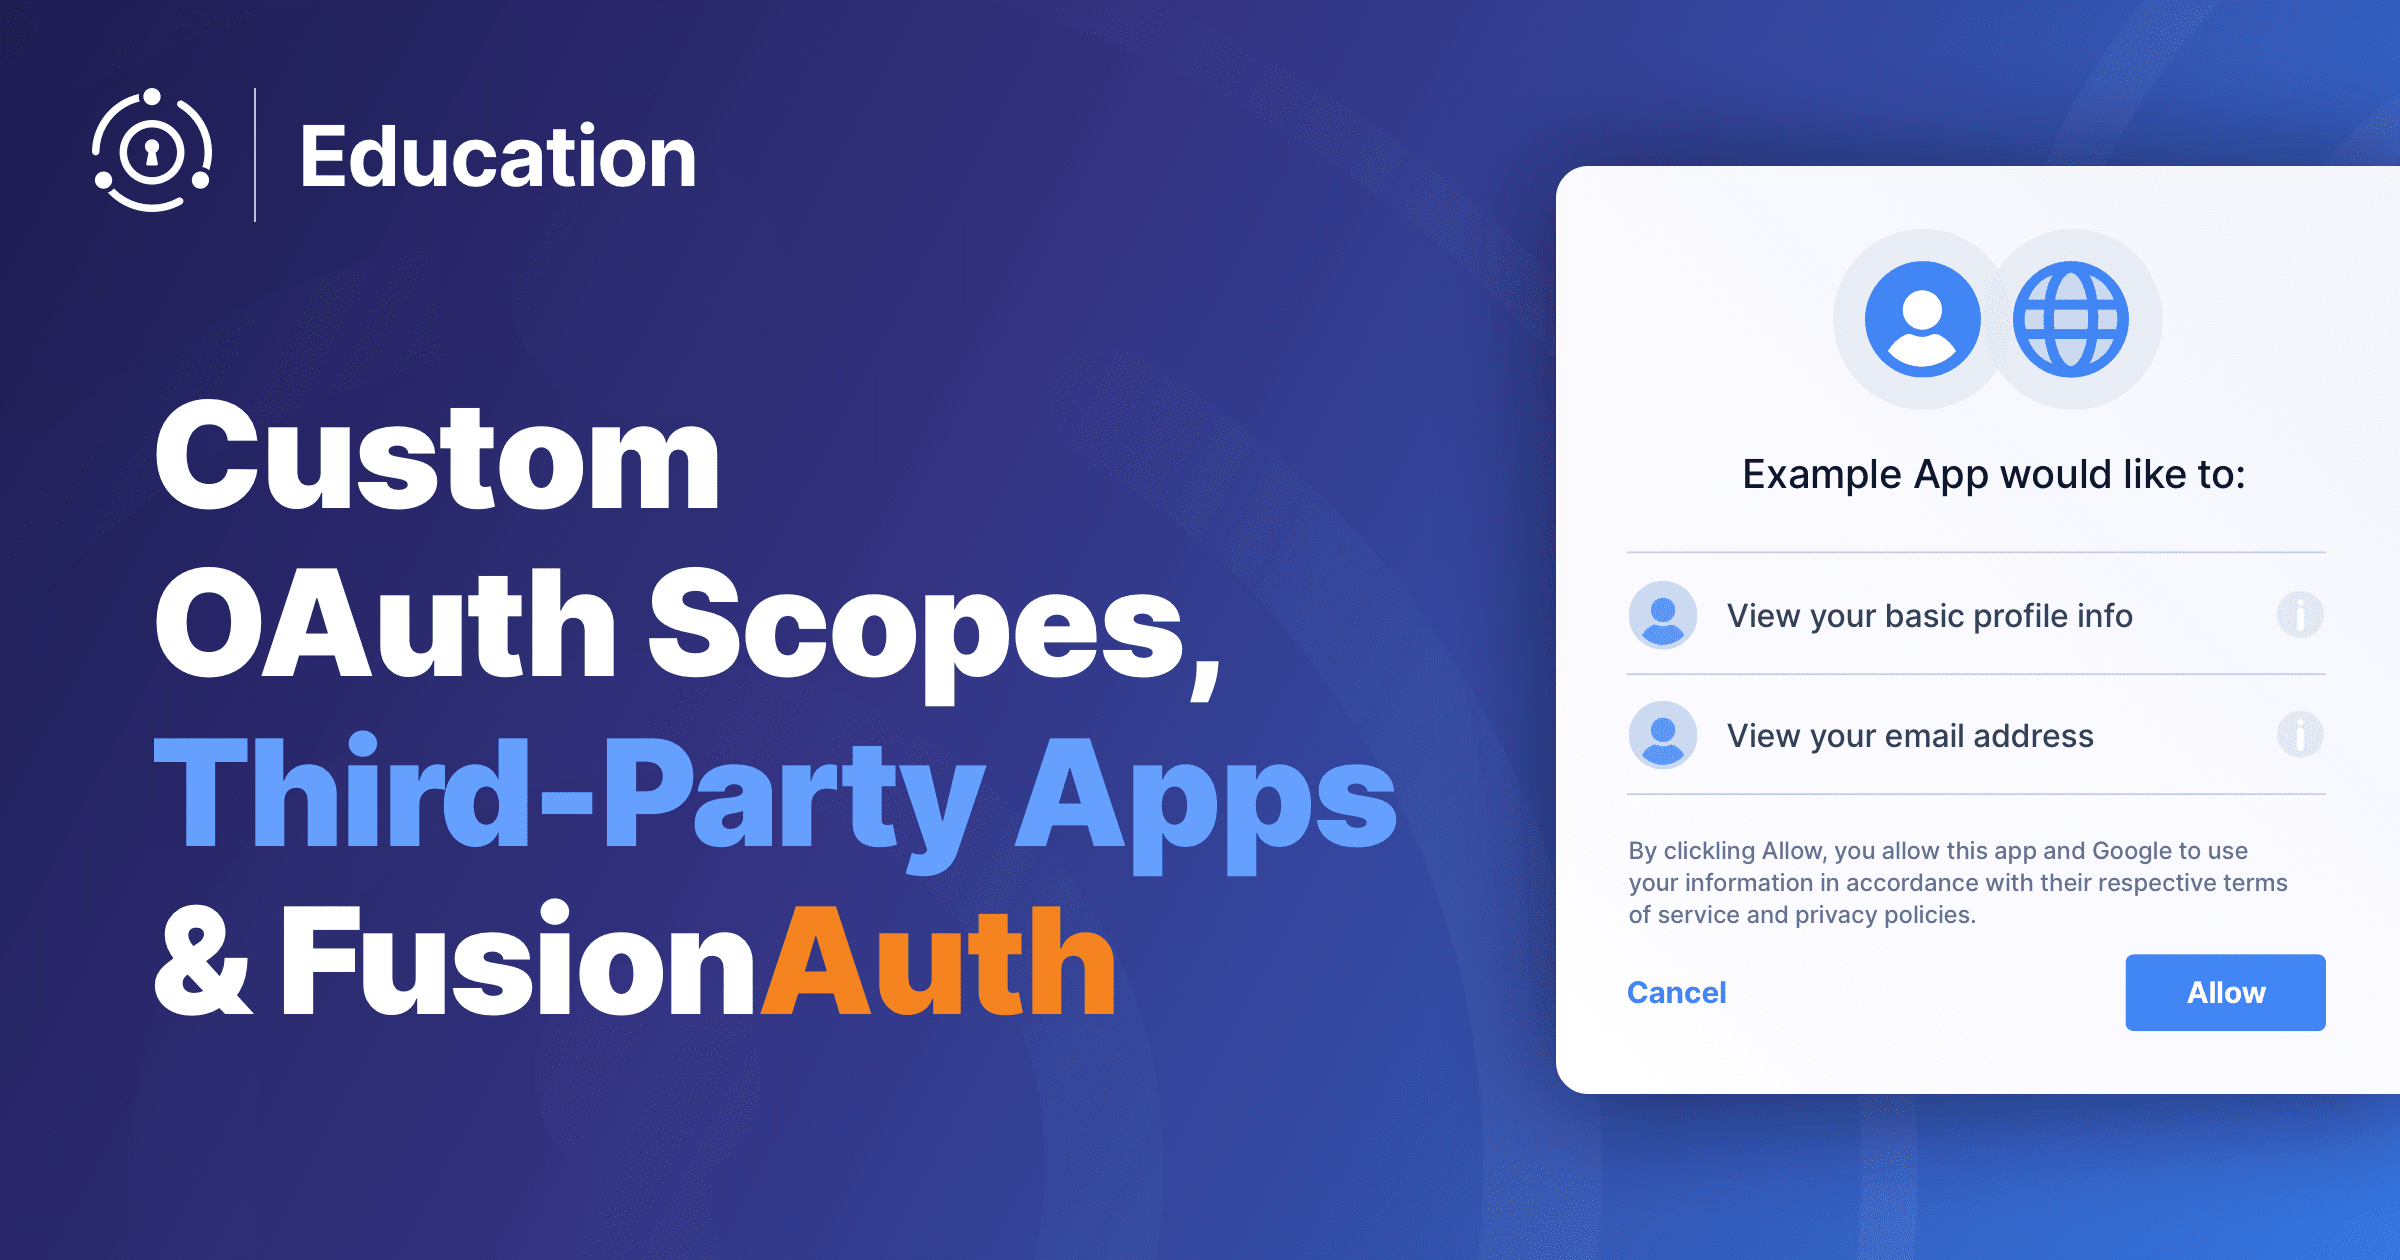 Custom Oauth Scopes, Third-Party Applications, And FusionAuth